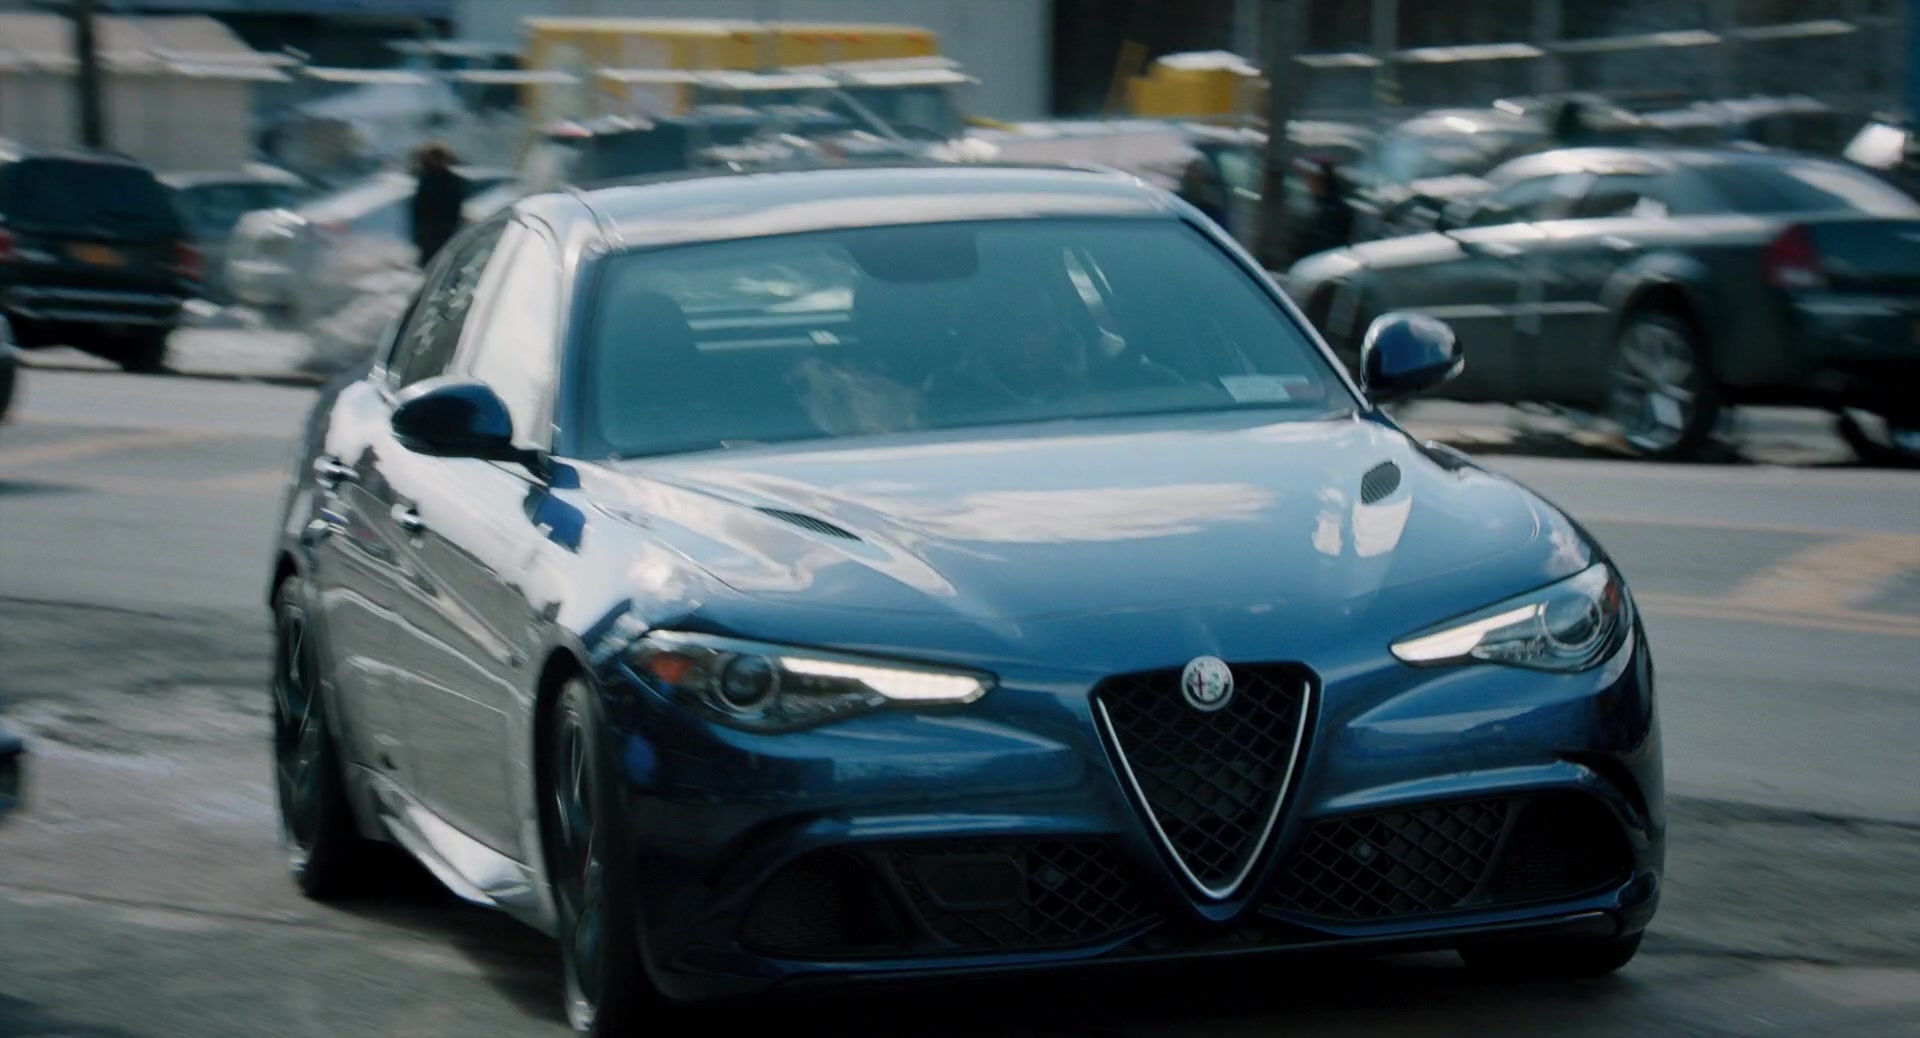 Alfa-Romeo-Blue-Car-Driven-by-Kevin-Hart-in-The-Upside-3.jpg